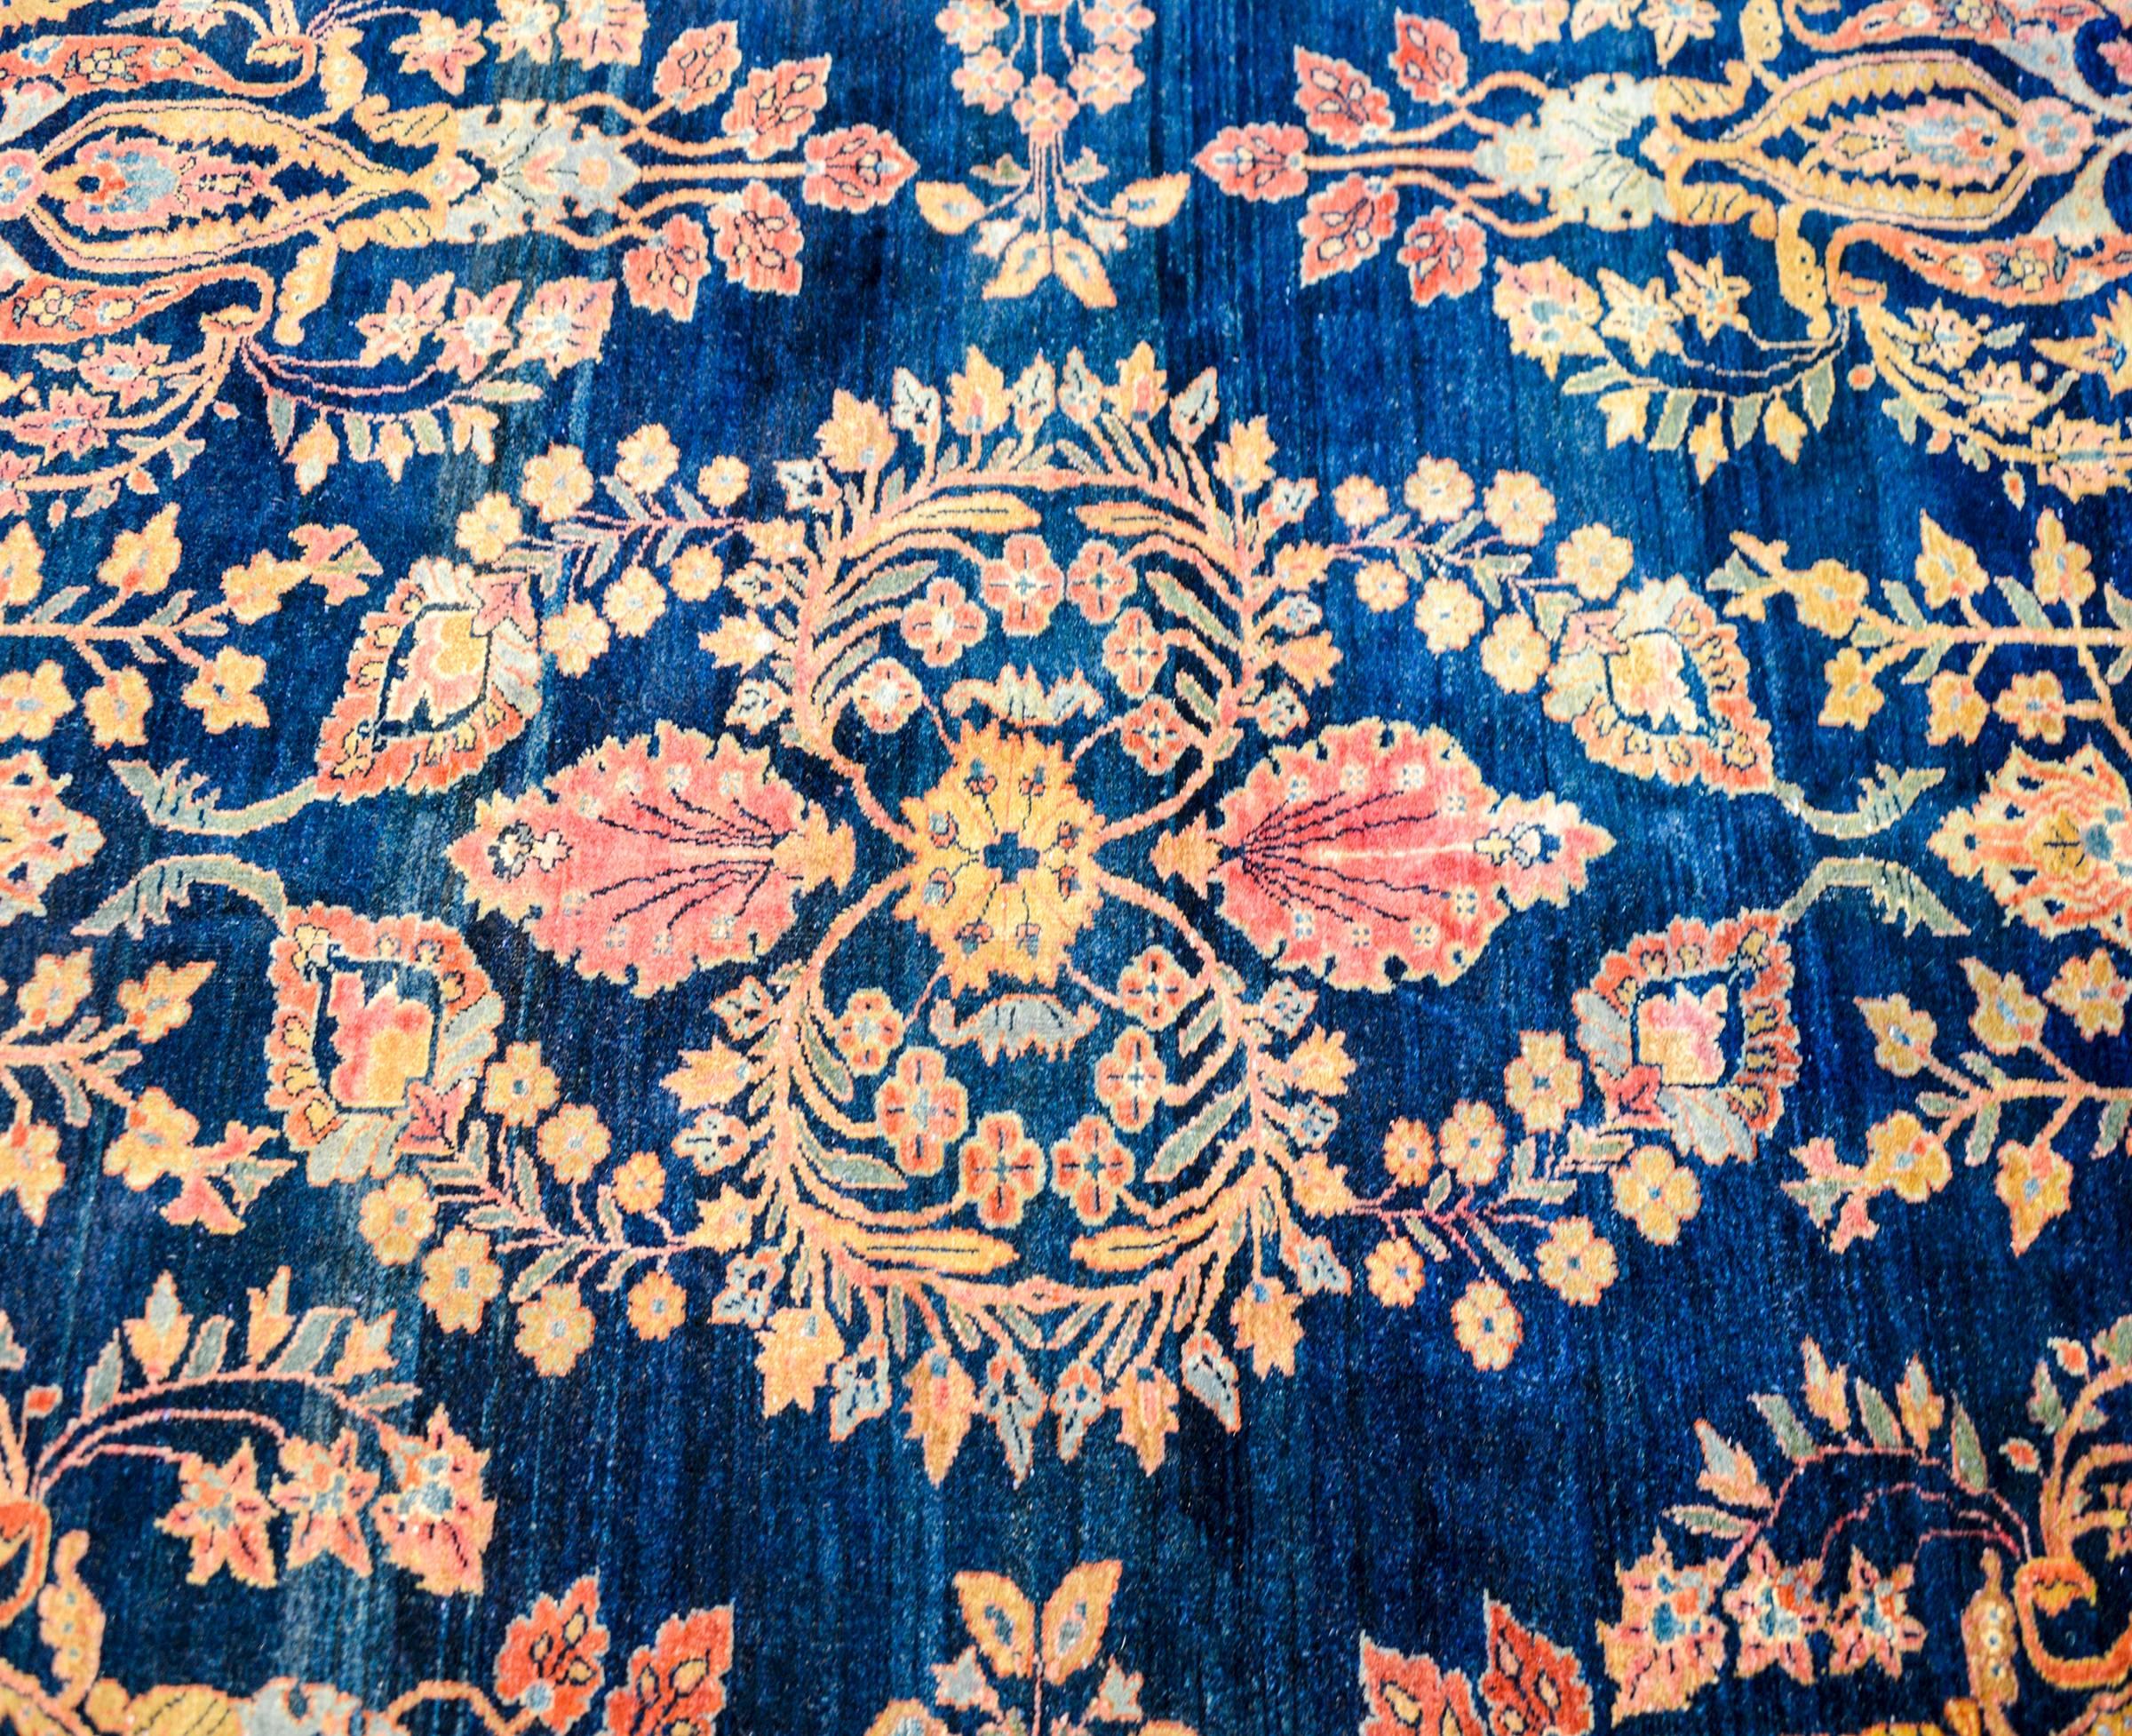 A remarkable Persian Sarouk Maharajan circa 1900 with an exquisite all-over mirrored floral and tree-of-life pattern woven in multicolored vegetable dyed wool on a natural indigo background. The border is complex with multiple wide and narrow